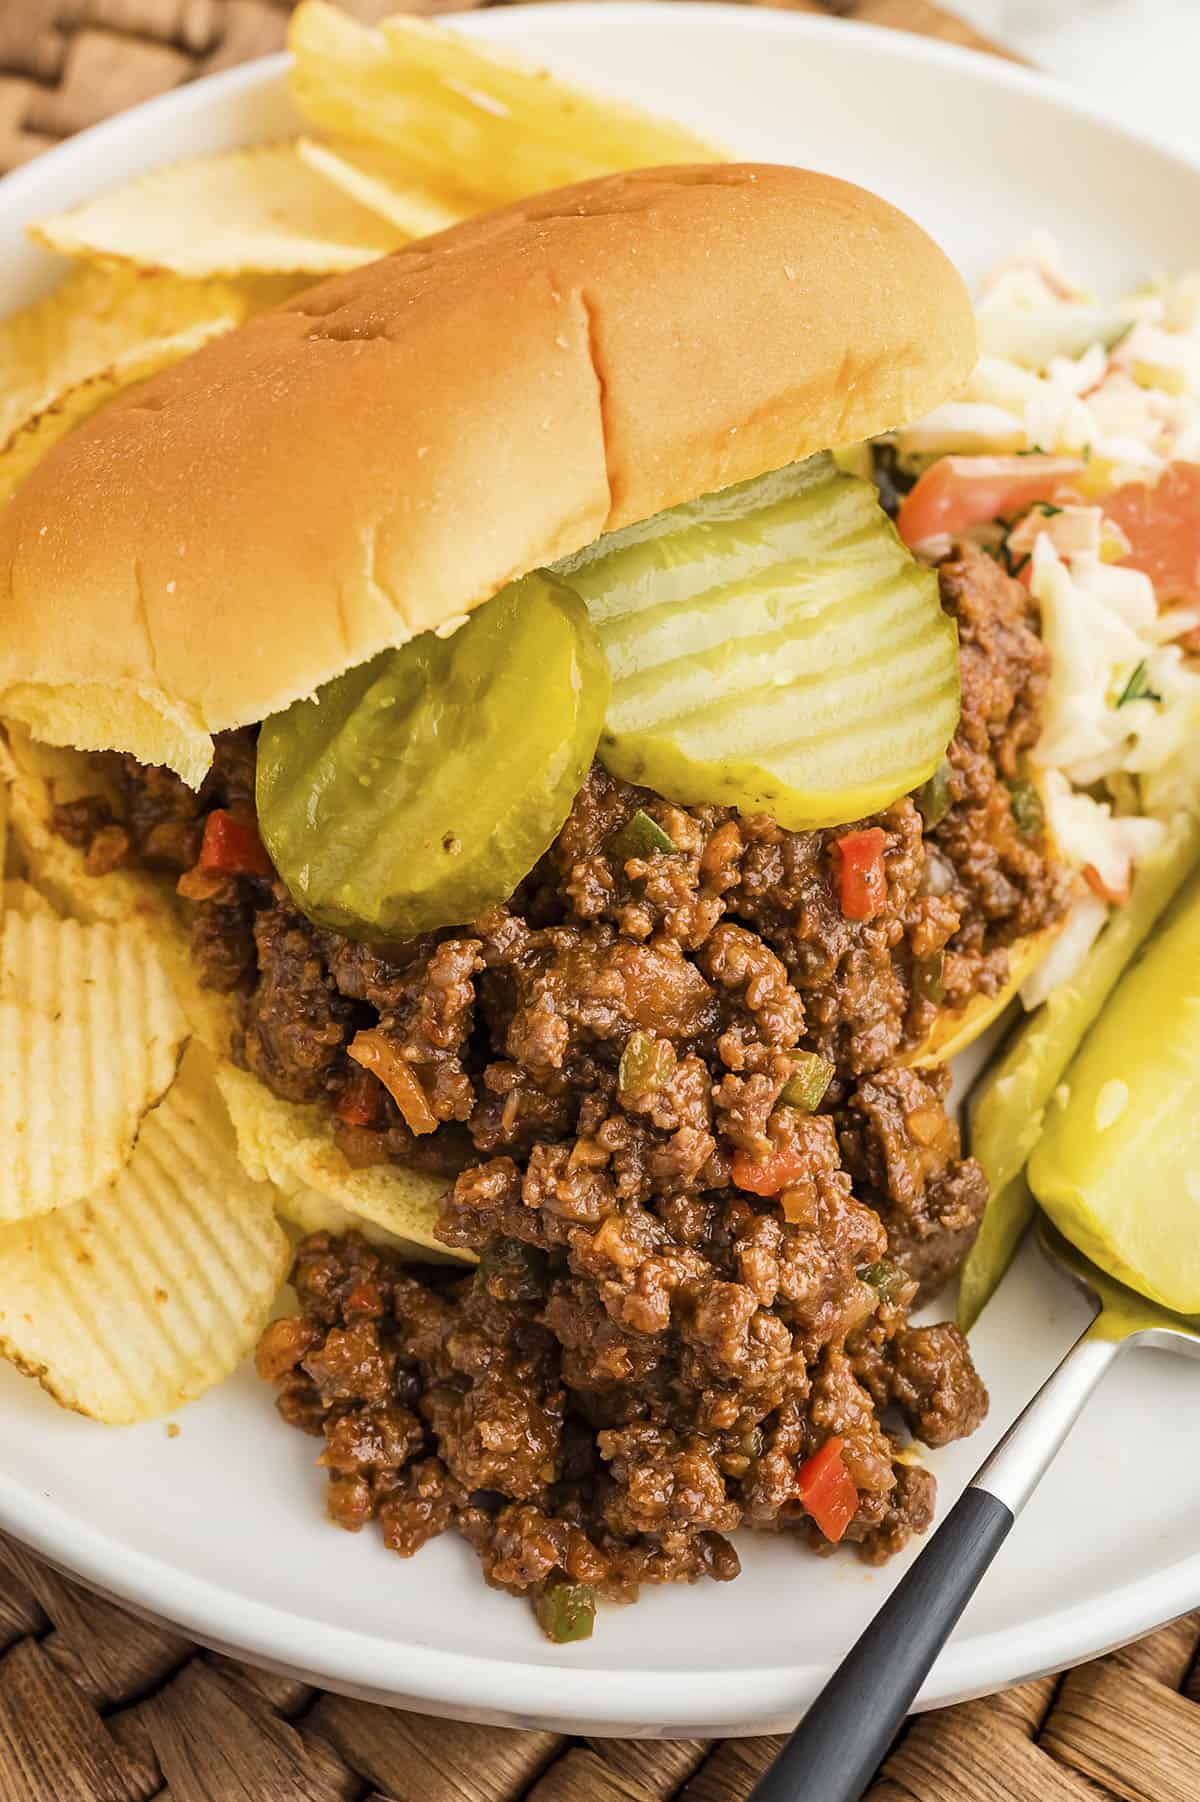 Homemade sloppy joe sandwich on white plate with chips and pickles.